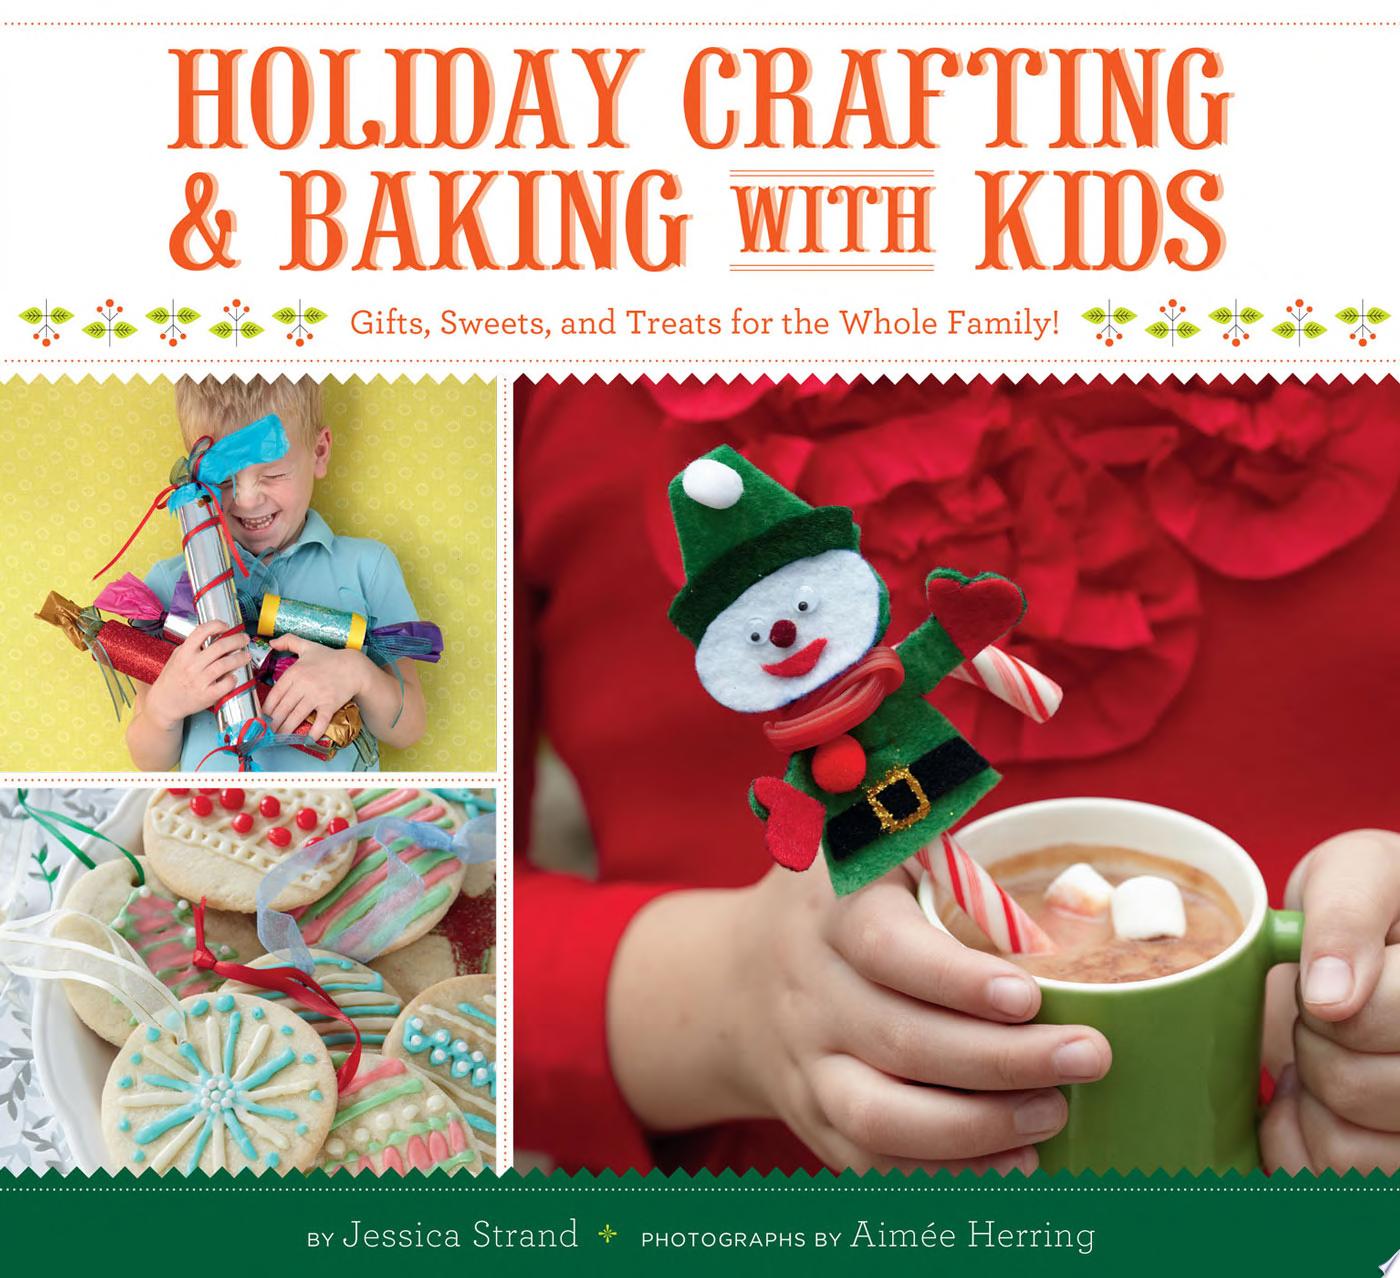 Image for "Holiday Crafting &amp; Baking with Kids"